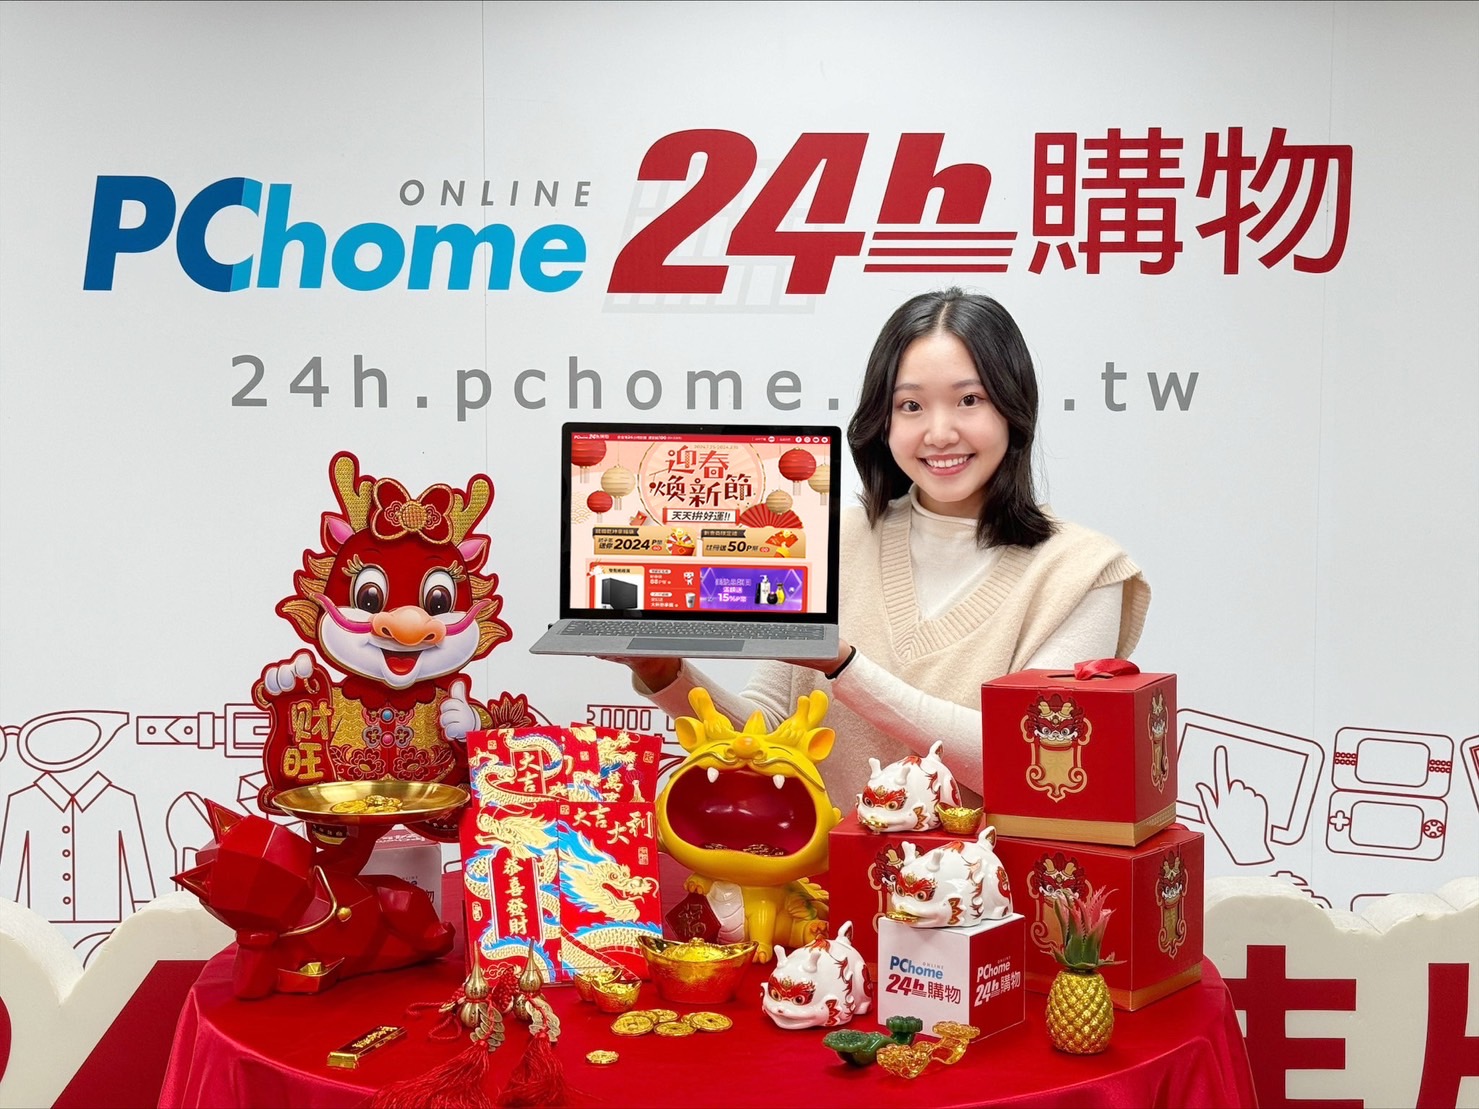 PChome 24h Shopping Shares 5 Tips for Wealth and Prosperity in the Year of the Dragon; Sales of Auspicious Items Increase by 39% and Sales of Gold Ornaments Increase by 20%